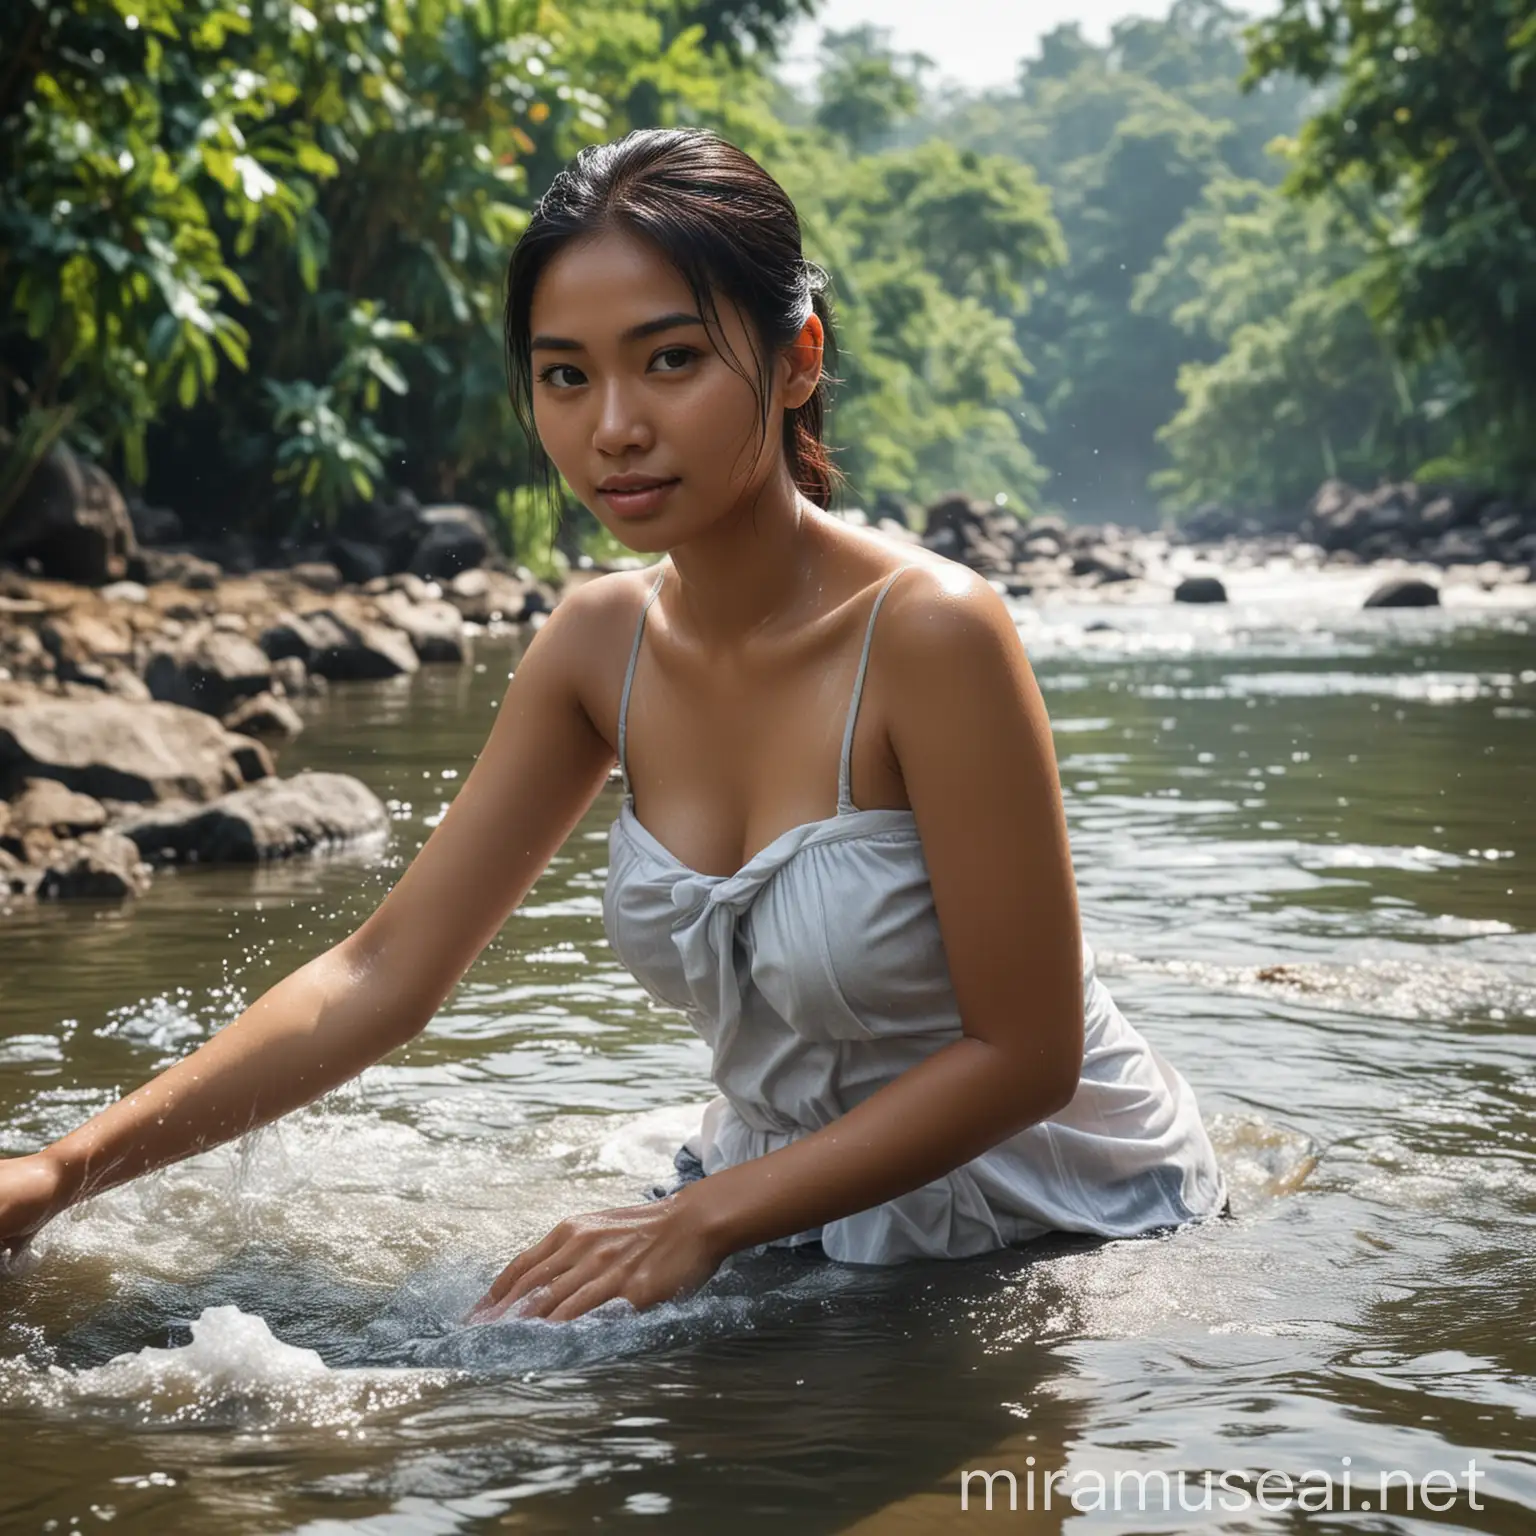 A beutiful indonesian girl, her 20s, bathing in the river while washing clothes, realistik, clear, 16k